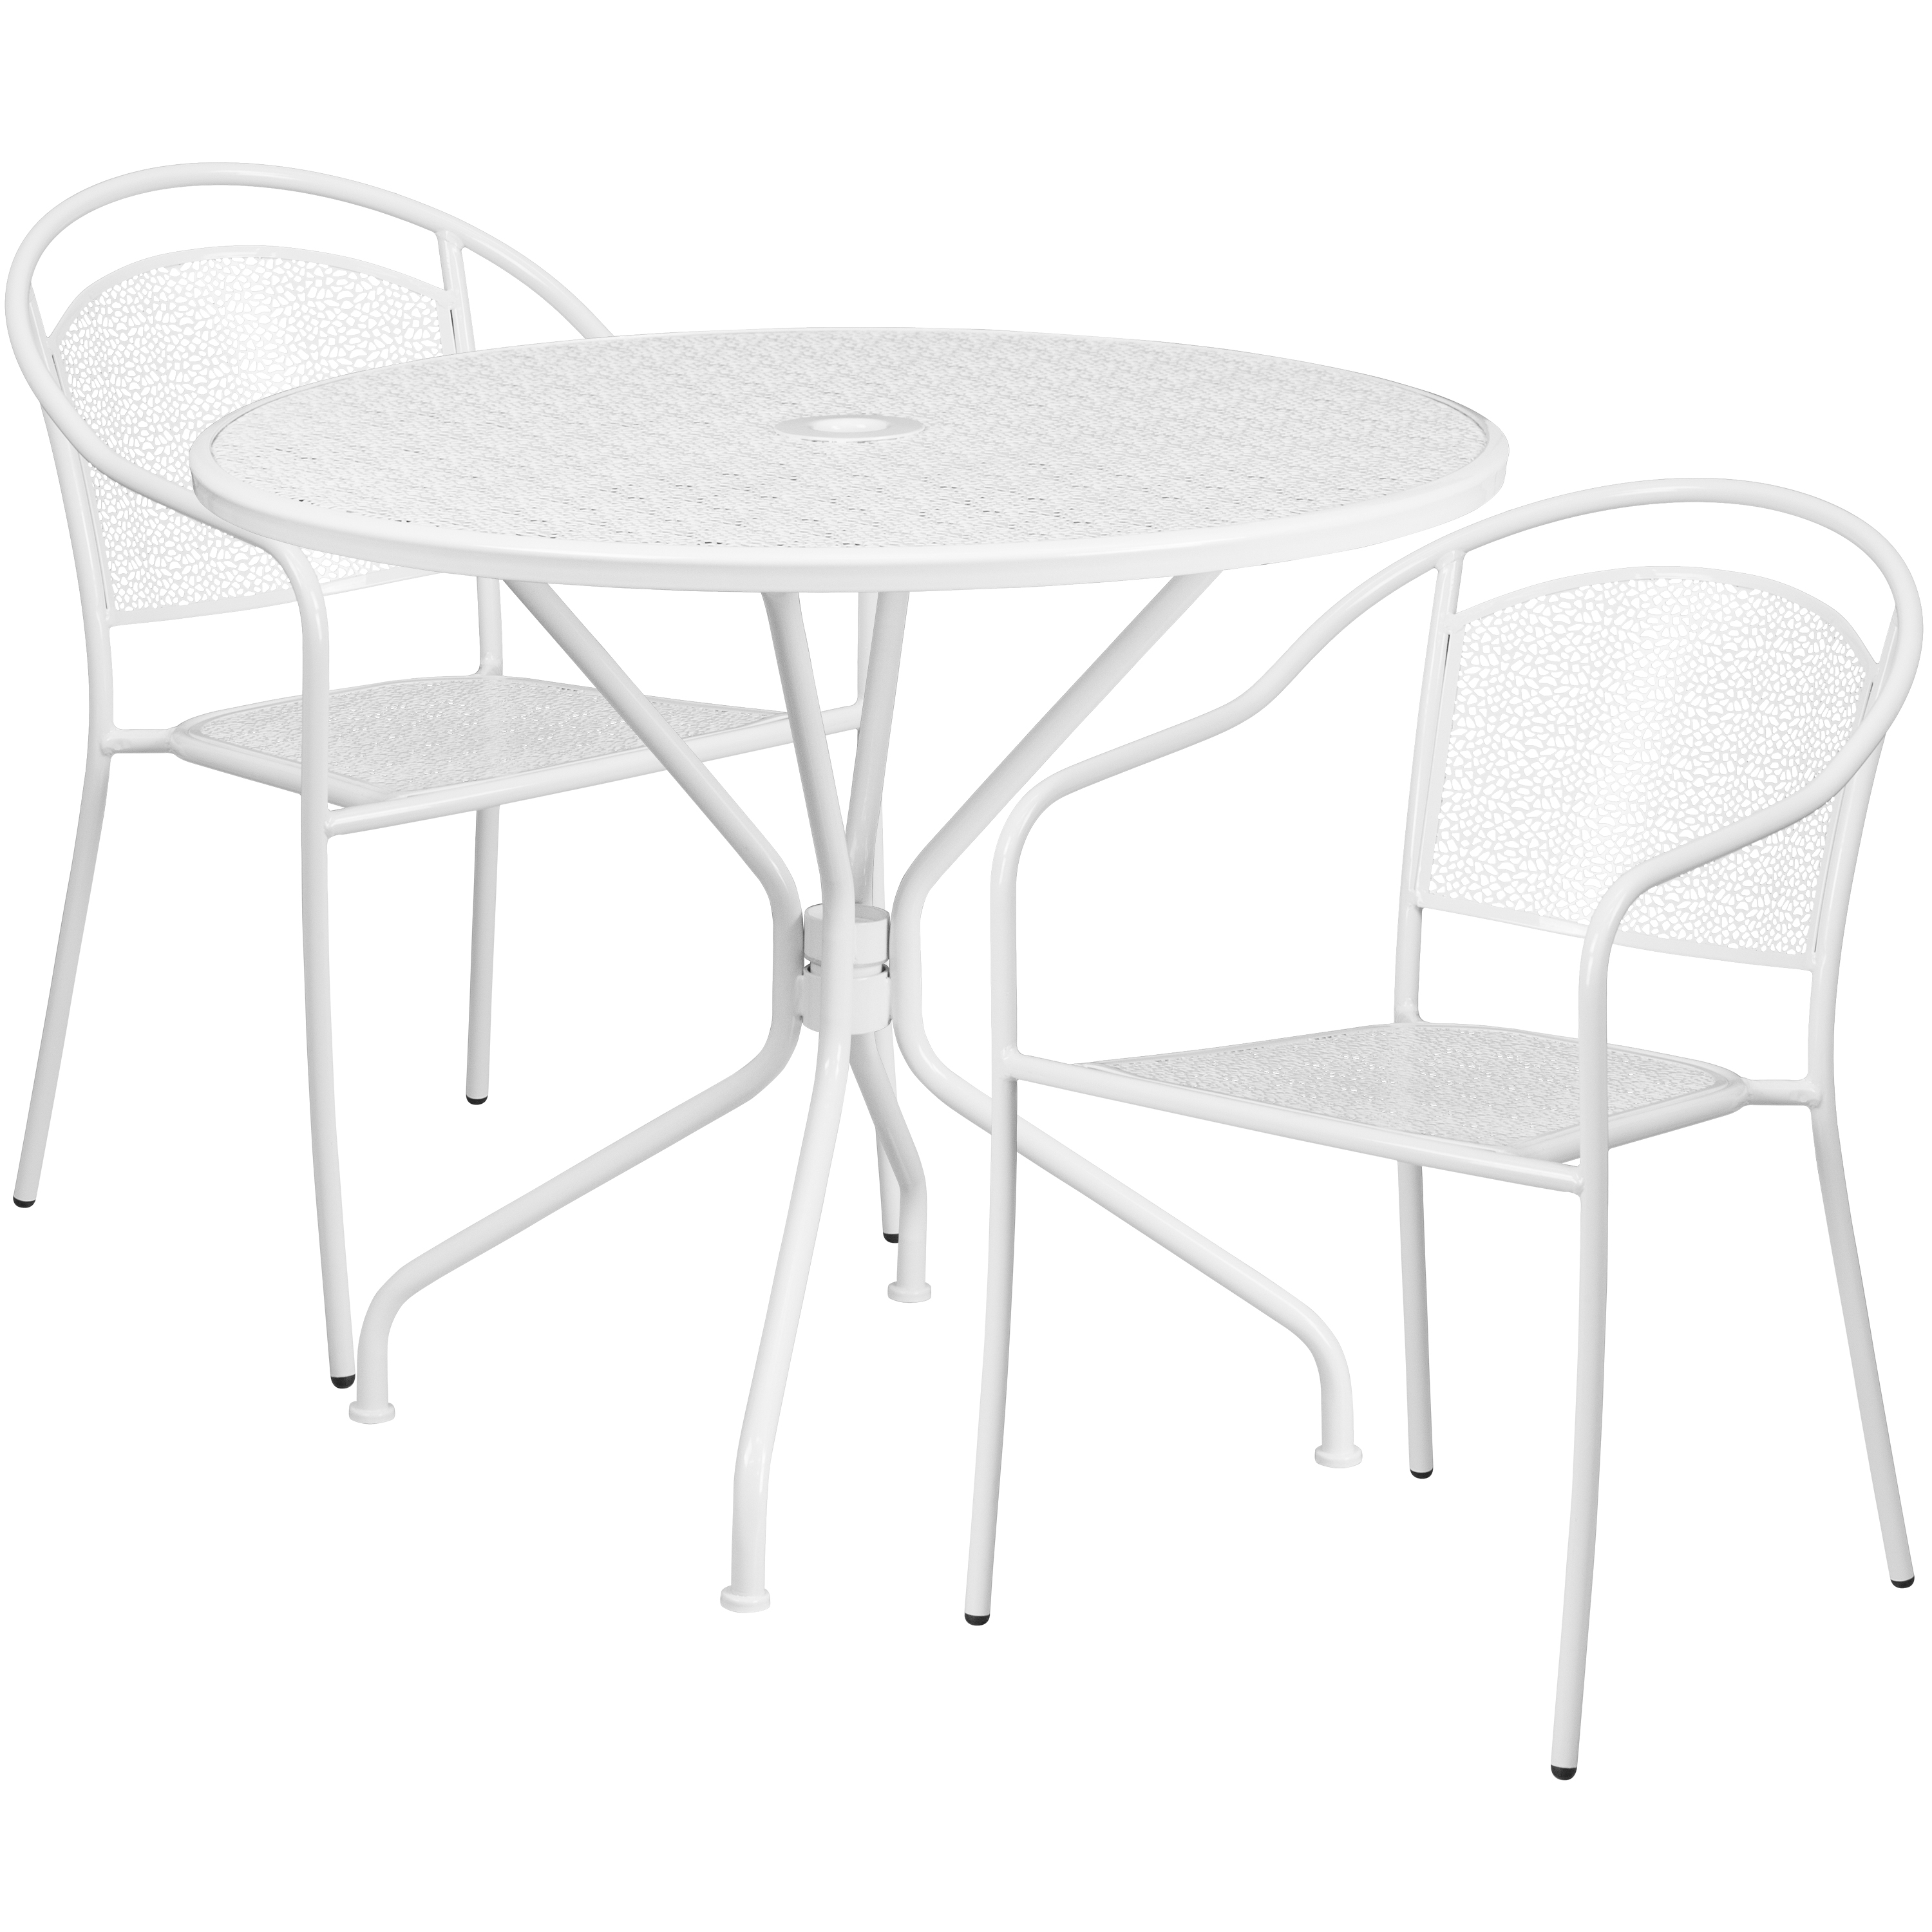 Flash Furniture CO-35RD-03CHR2-WH-GG 35.25" Round White Indoor/Outdoor Steel Patio Table Set with 2 Round Back Chairs